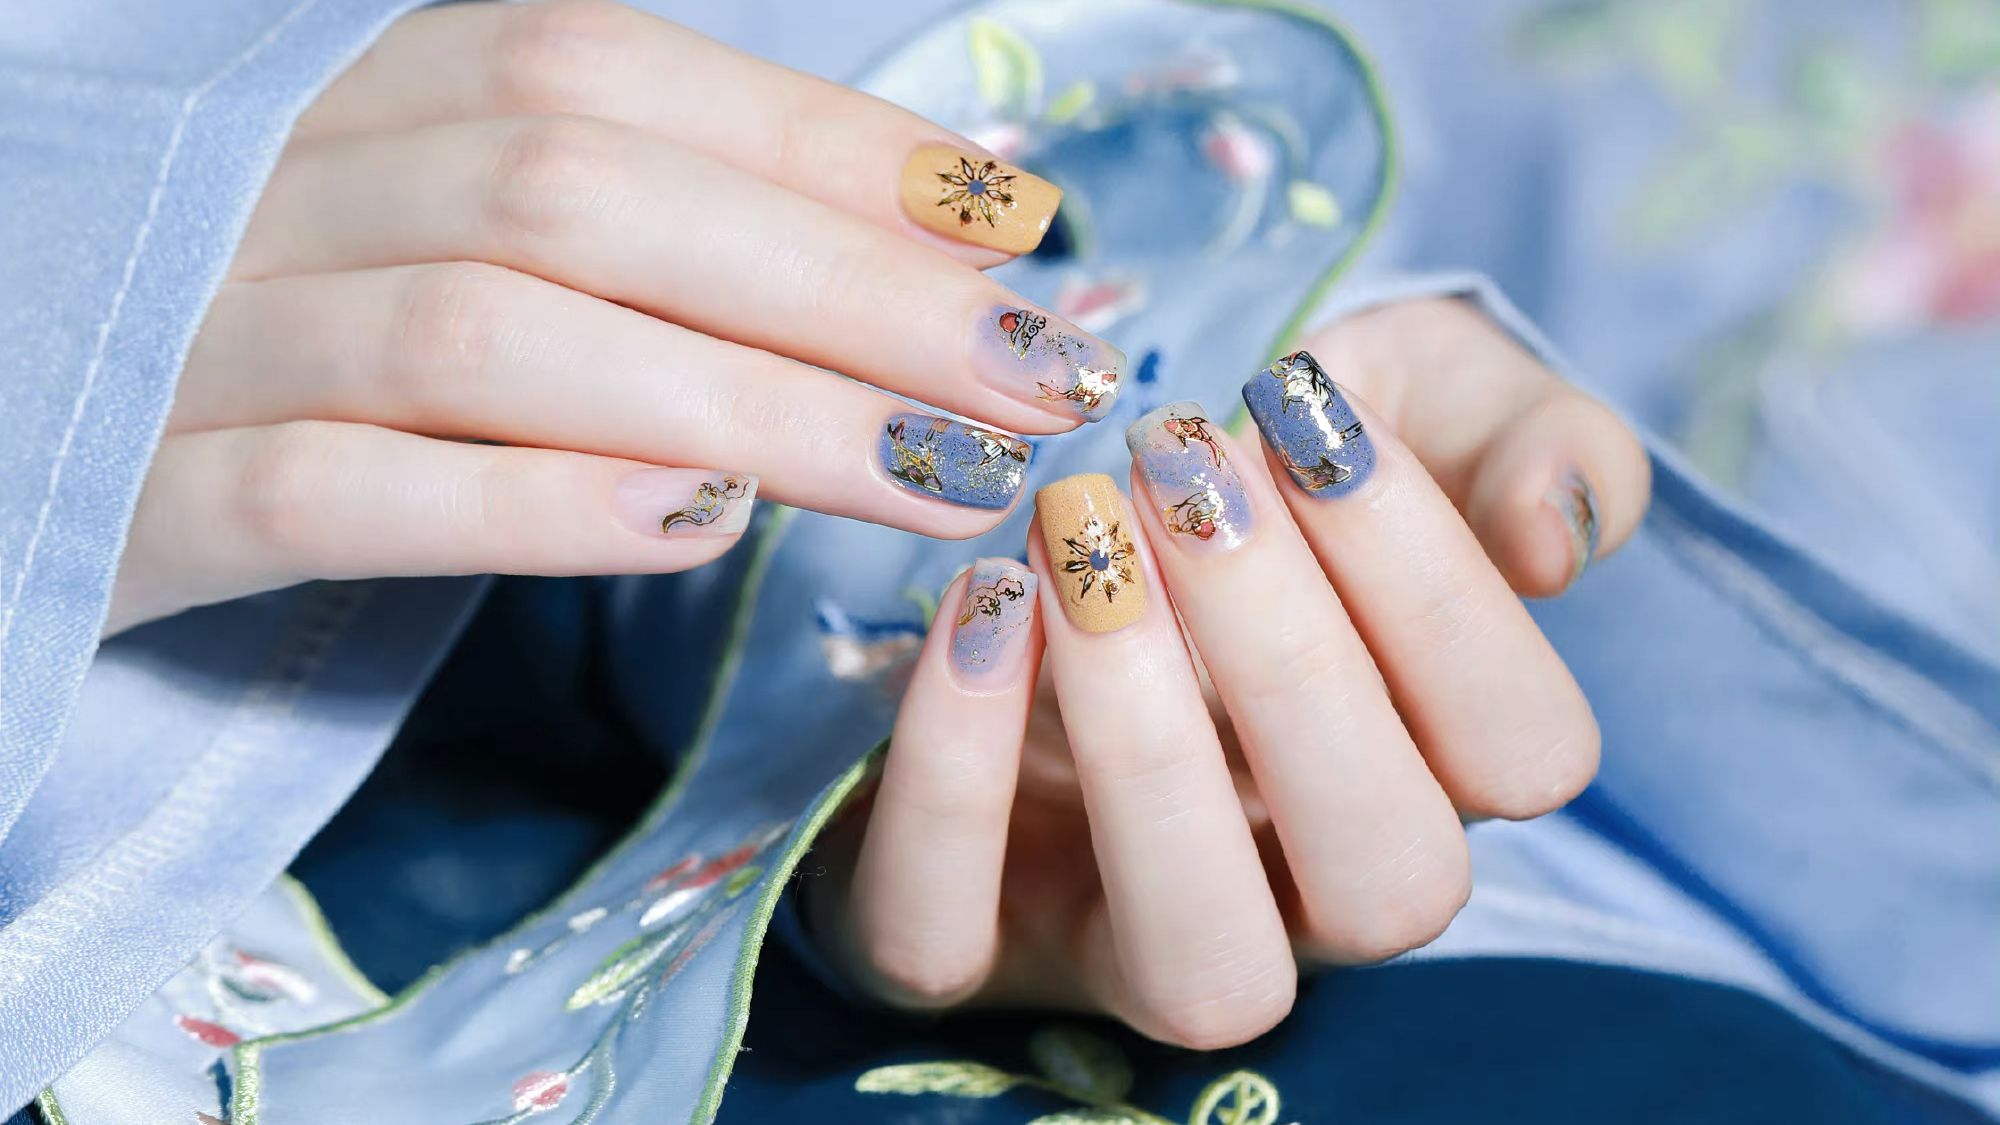 Manicure and pedicure 2020–2021: design, trends, novelties - news from SEC  Gulliver